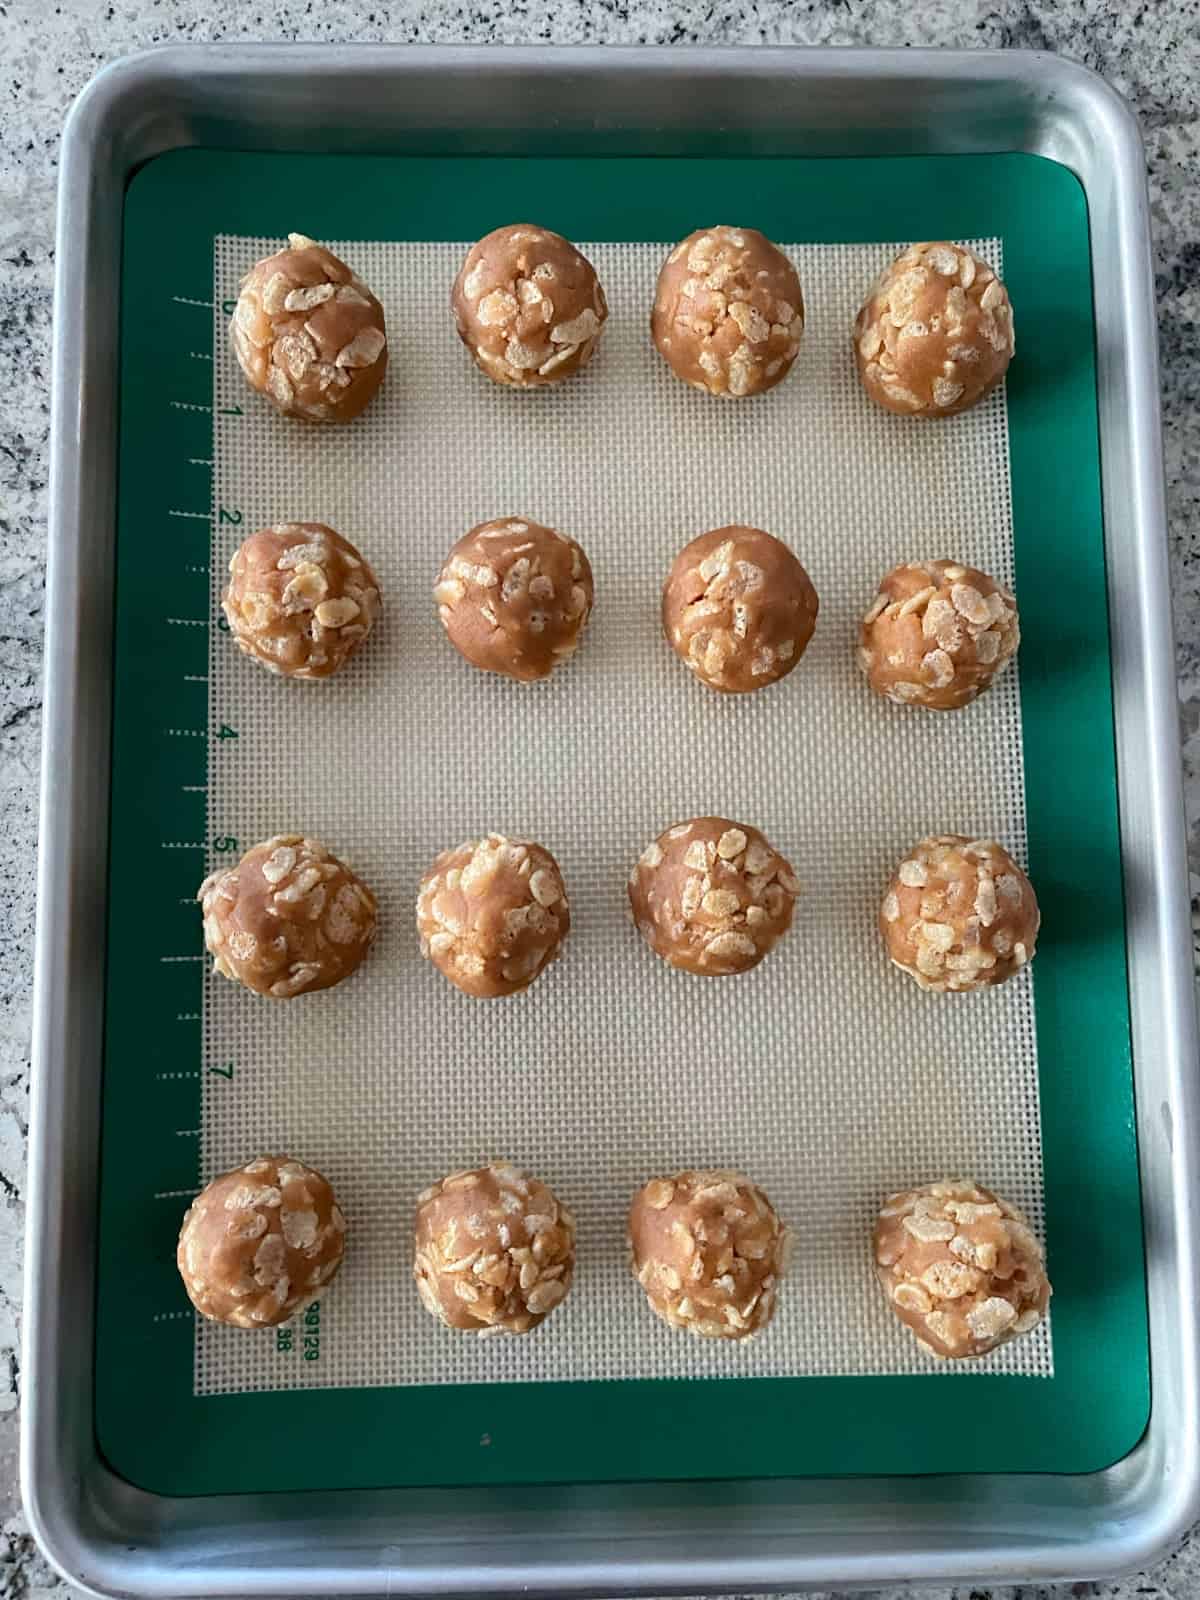 Undipped crispy peanut butter bon bons on silicone liner on small baking sheet.